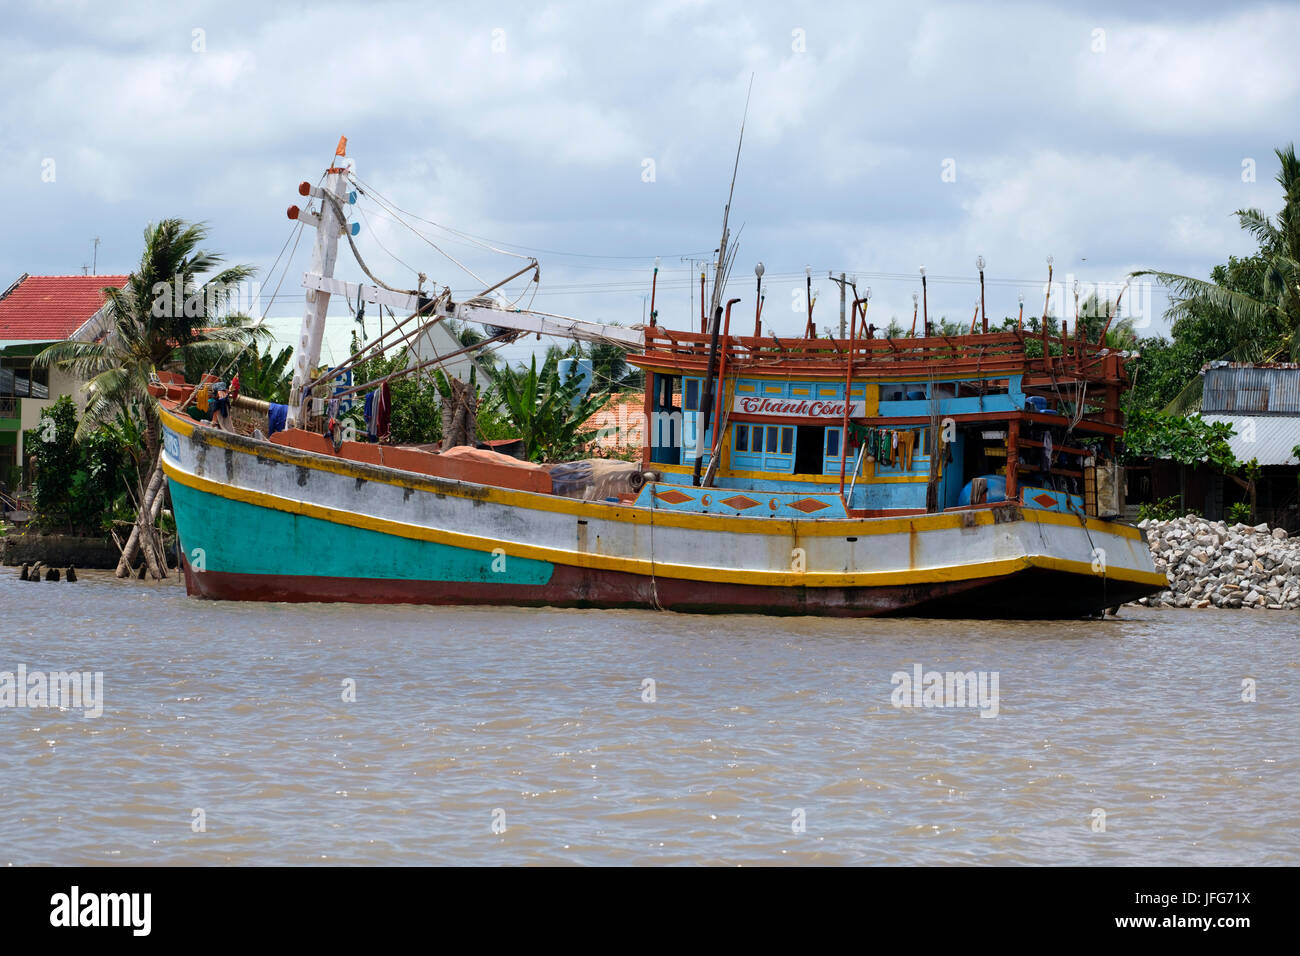 Colorful fishing boat on the Mekong river Stock Photo